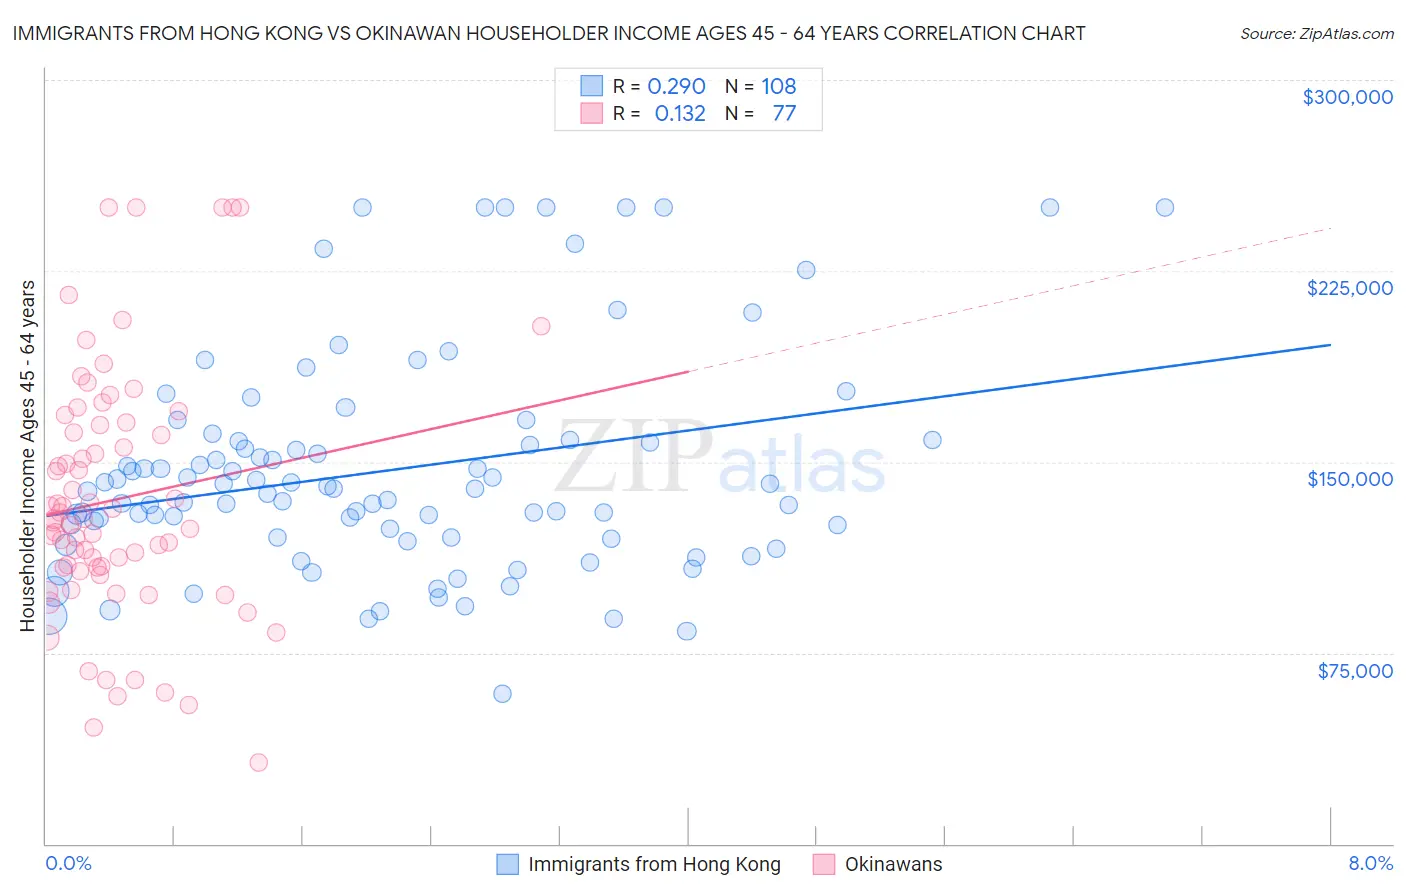 Immigrants from Hong Kong vs Okinawan Householder Income Ages 45 - 64 years